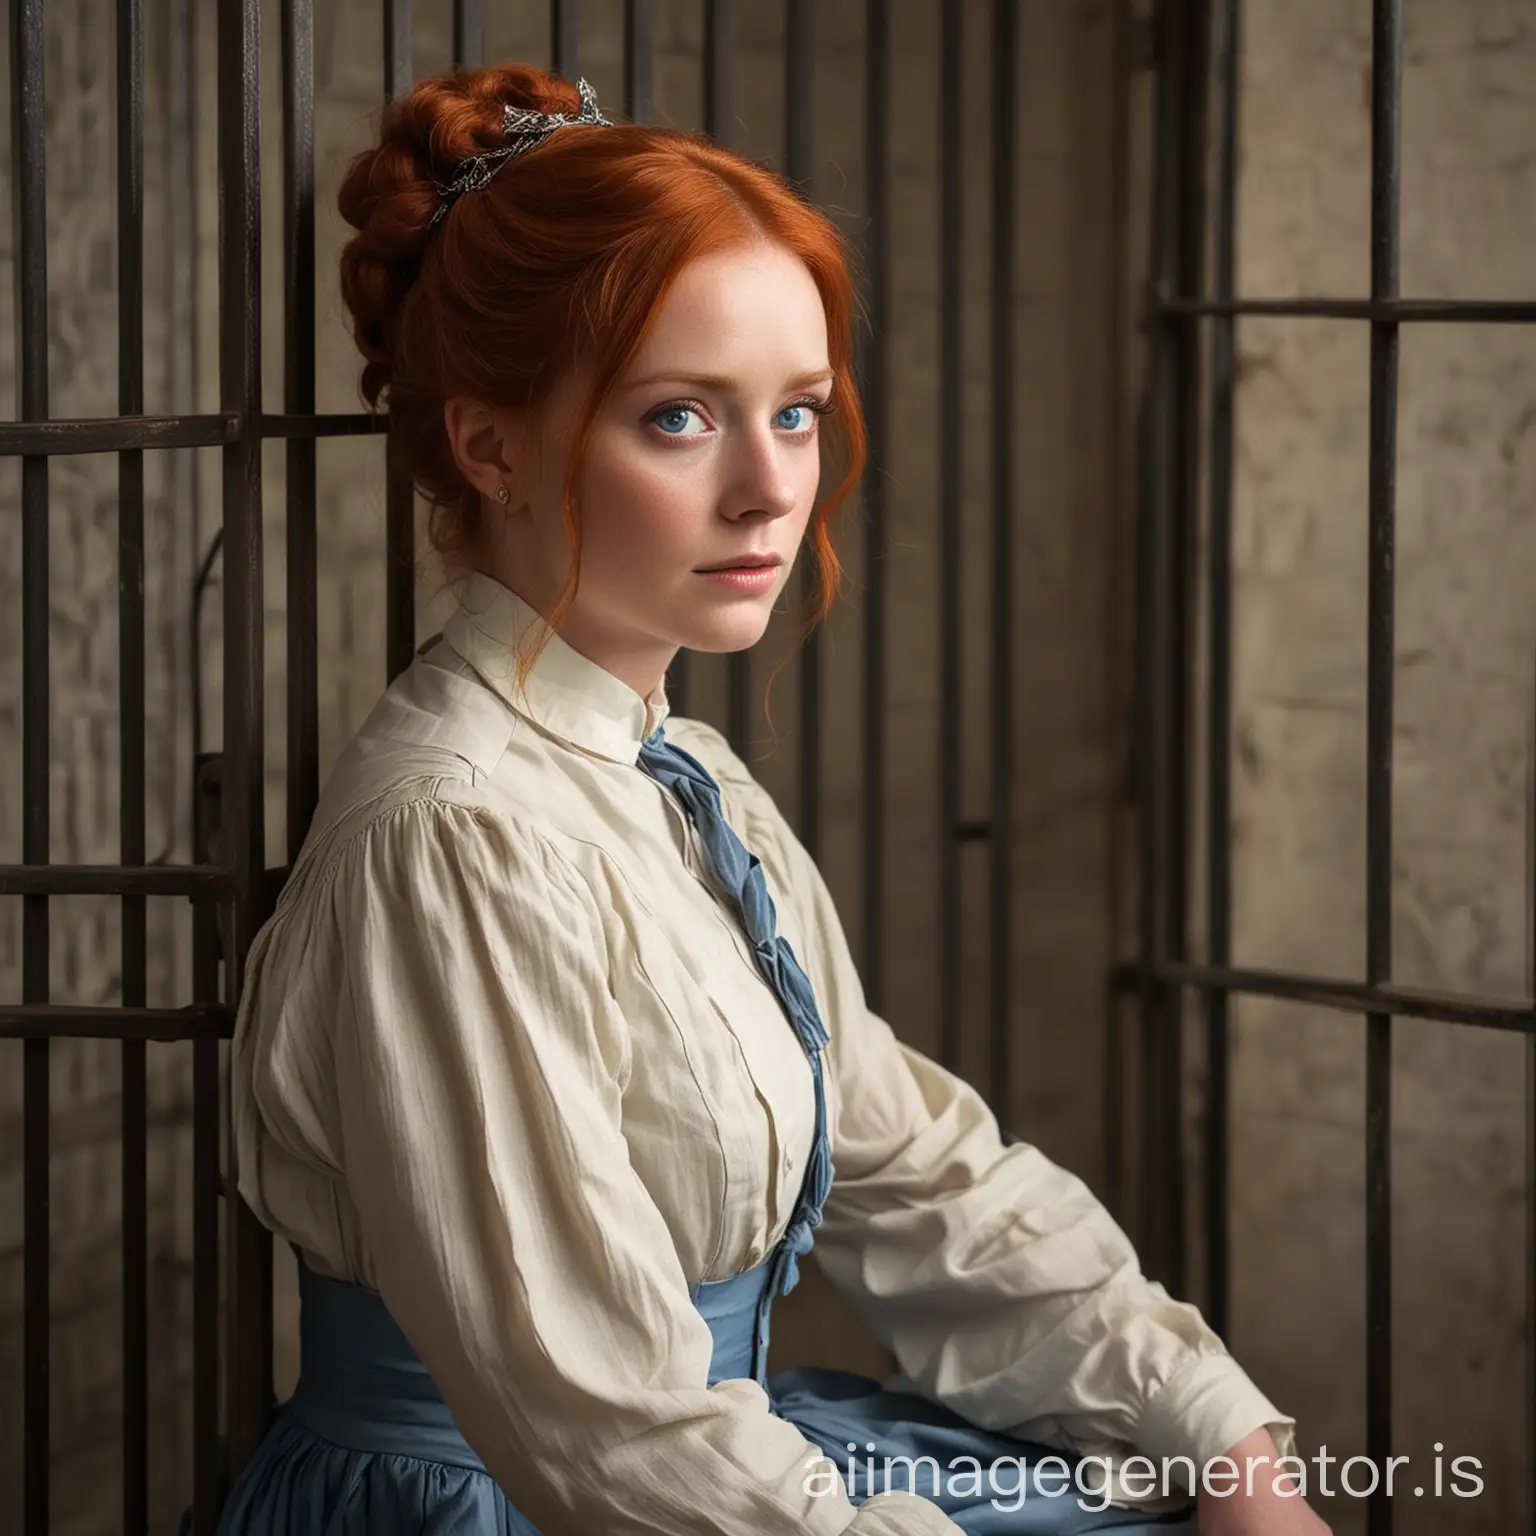 a beautiful young red haired blue eyed socialite turned suffragist is sitting in a jail cell. Across from her is a tal dark and handsome man with intense blue eyes. It is the mid 1800s.
